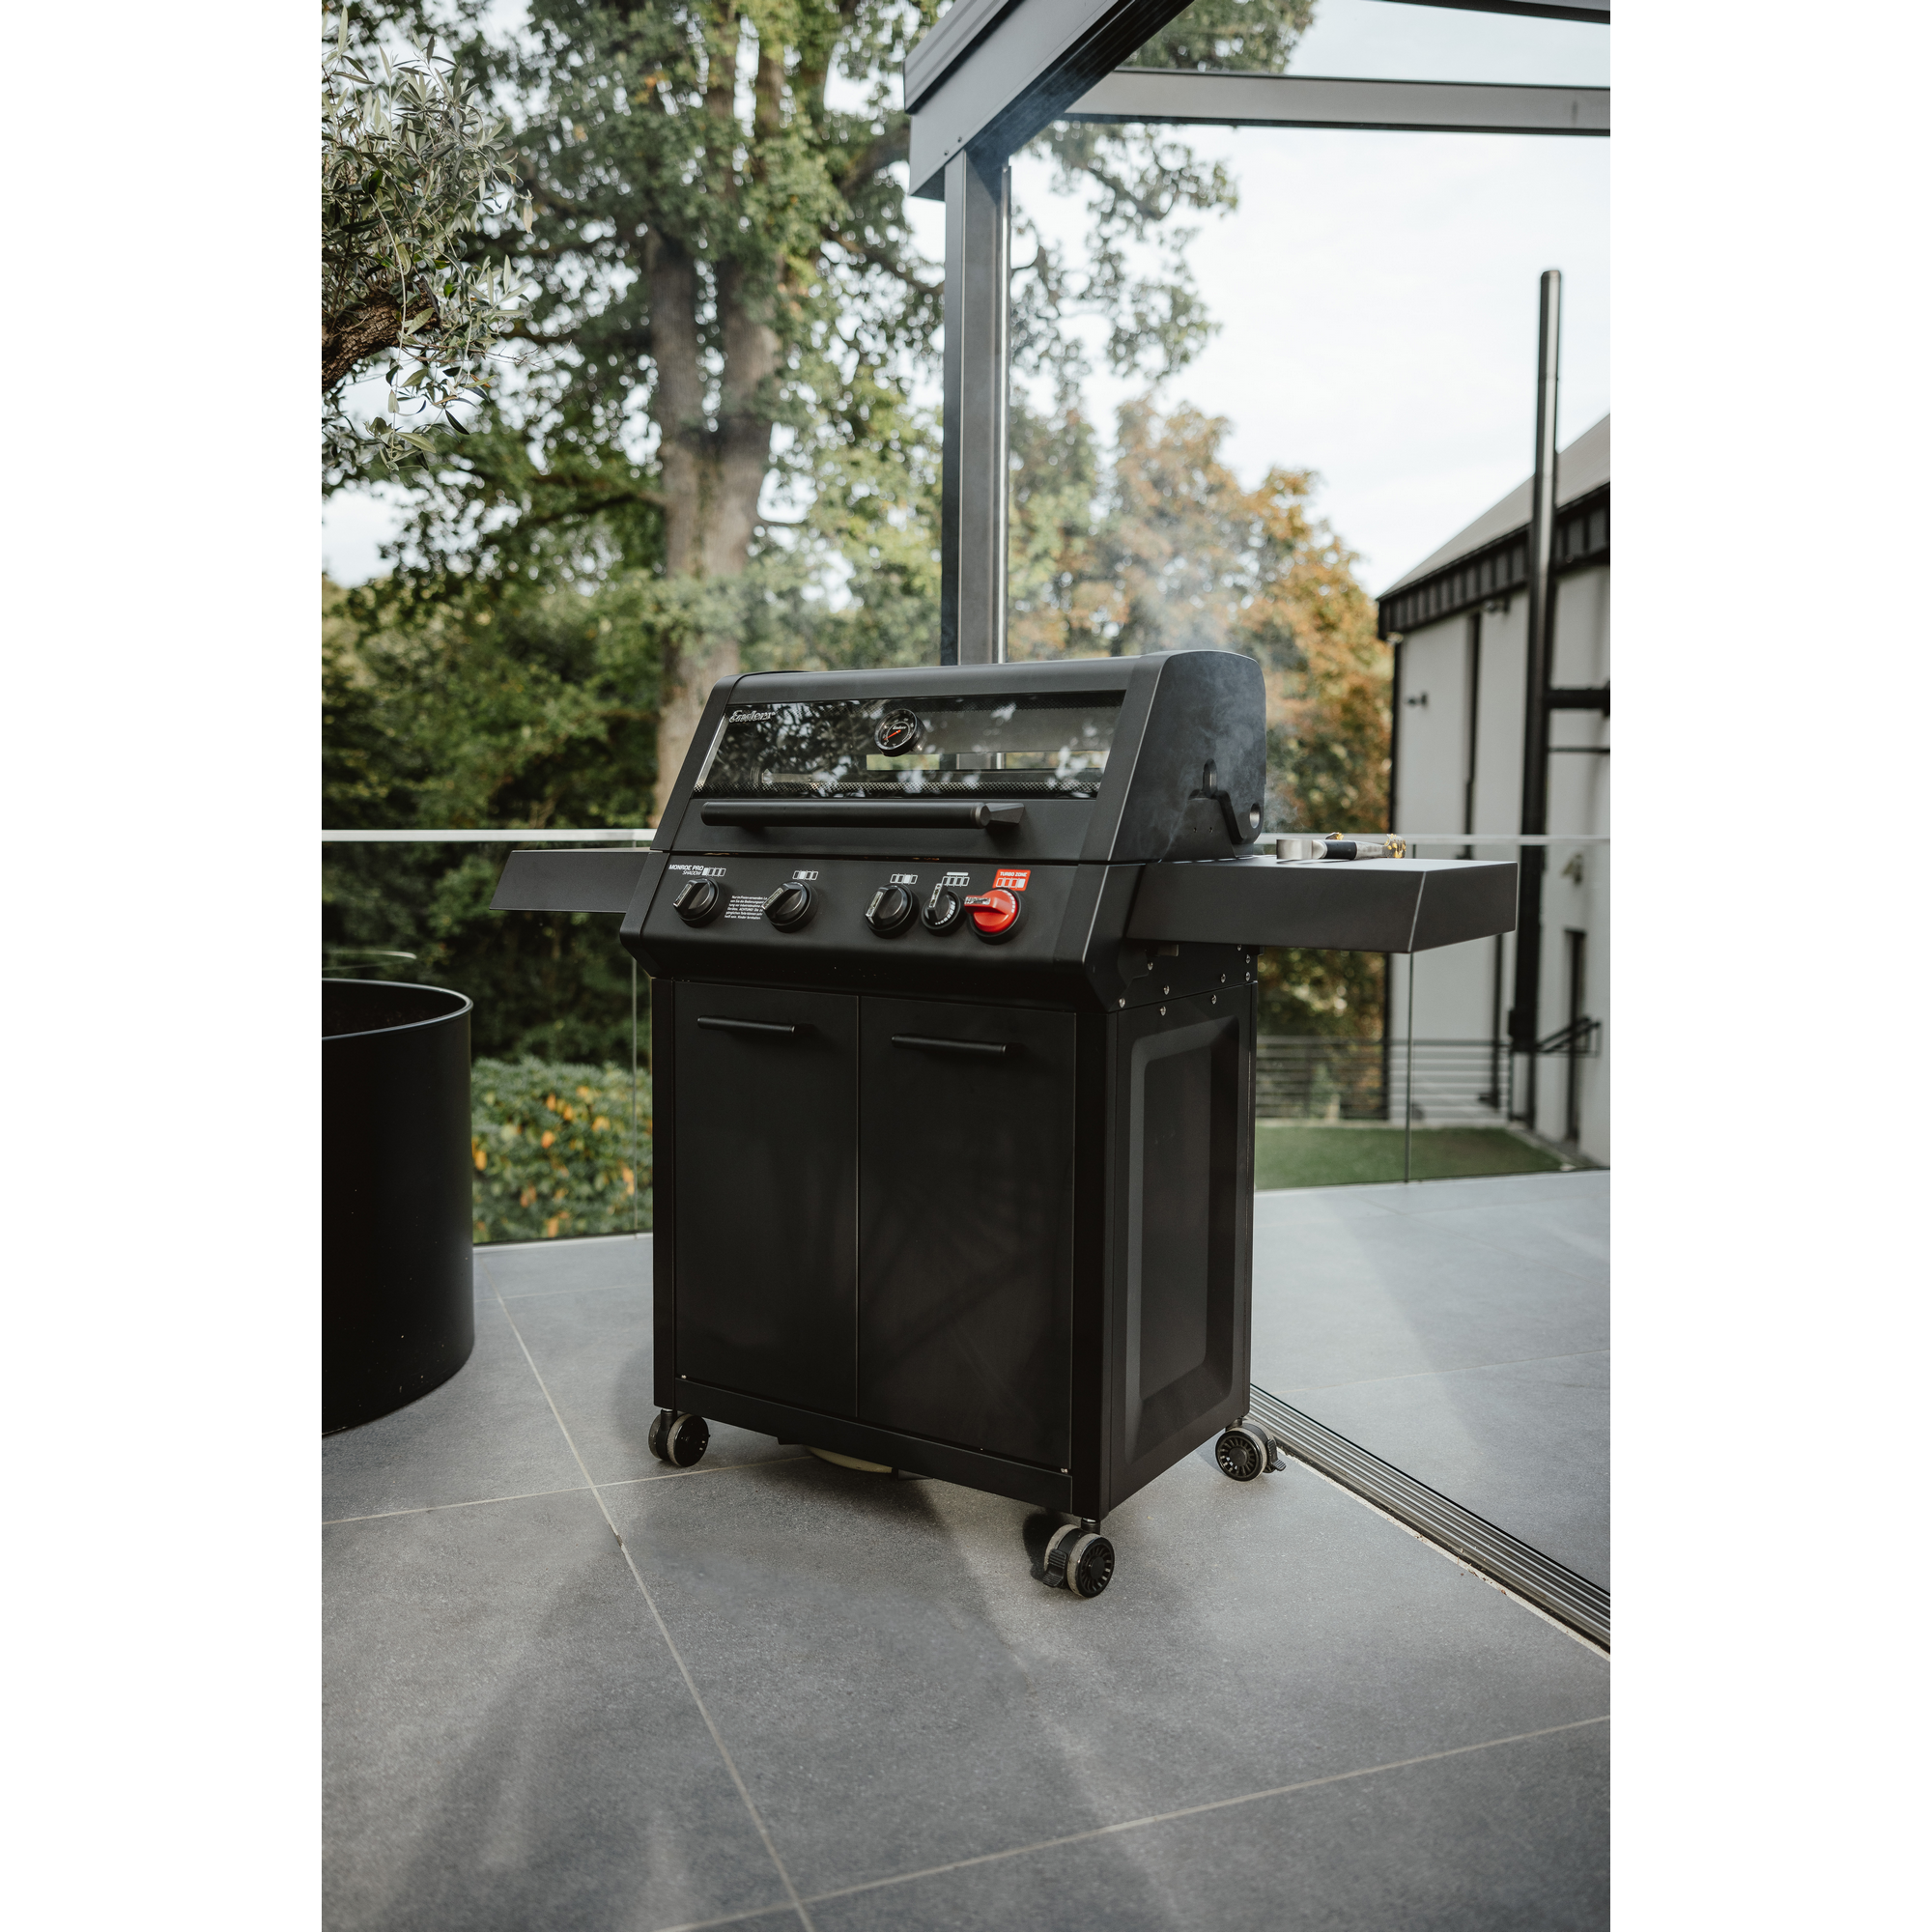 Gasgrill 'Monroe ProX 4 SIR Turbo Shadow' 4 Brenner 153,5 x 58 x 118,5 cm + product picture